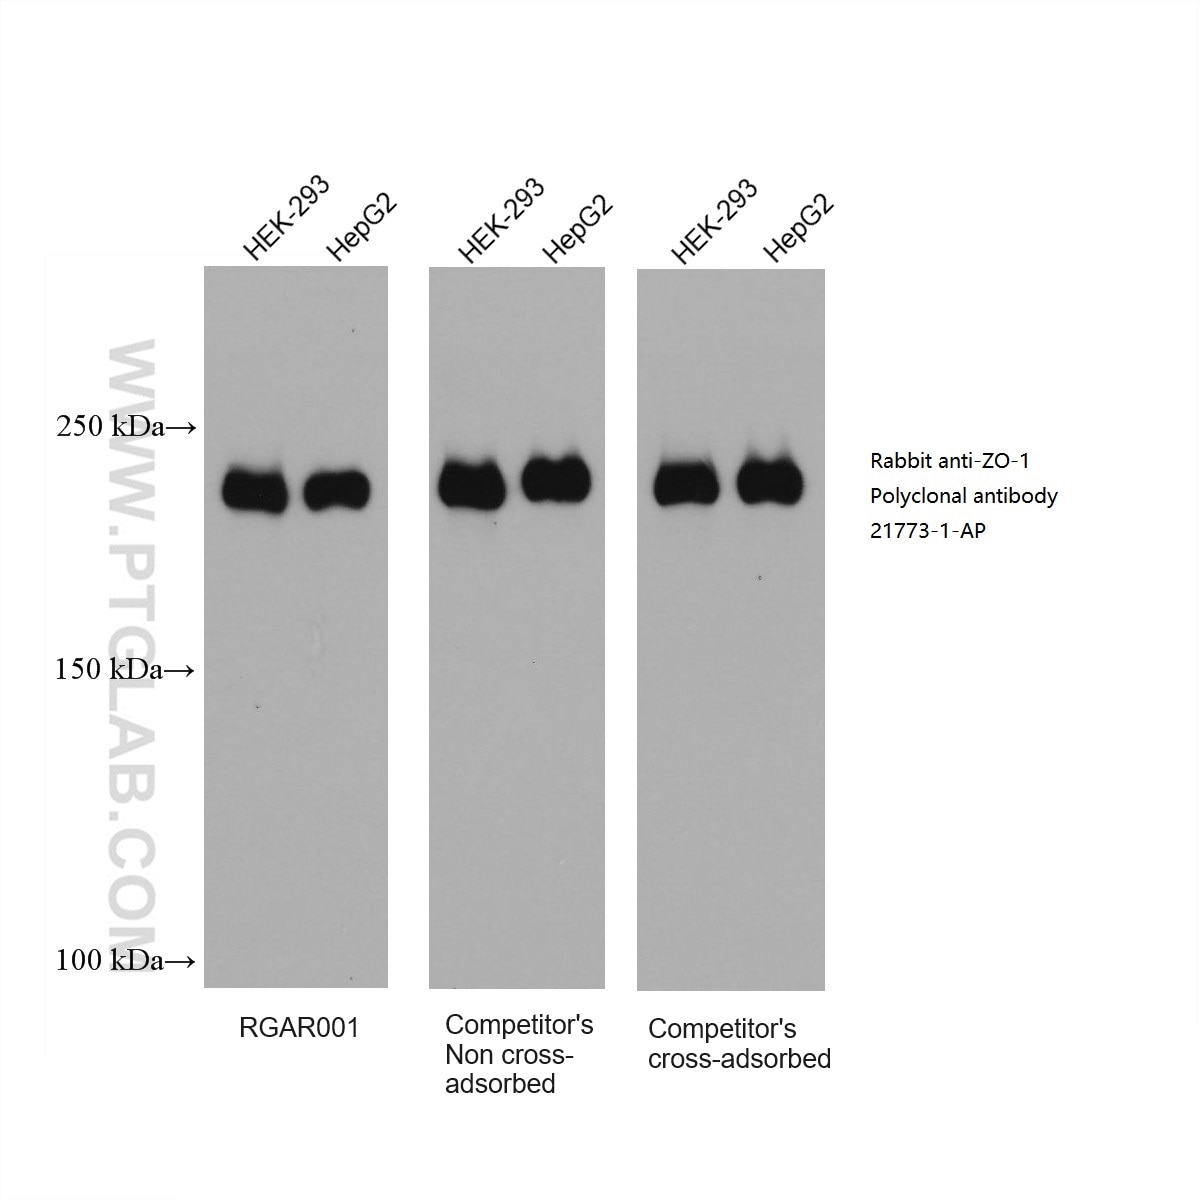 HEK-293 and HepG2 cell lysates were subjected to SDS-PAGE followed by western blot with rabbit anti-ZO-1 polyclonal antibody (21773-1-AP) at dilution of 1:50000. Multi-rAb HRP-Goat Anti-Rabbit Recombinant Secondary Antibody (H+L) (RGAR001), leading competitor’s non cross-adsorbed and cross-adsorbed secondary antibodies were all used at 0.05μg/mL for detection. 